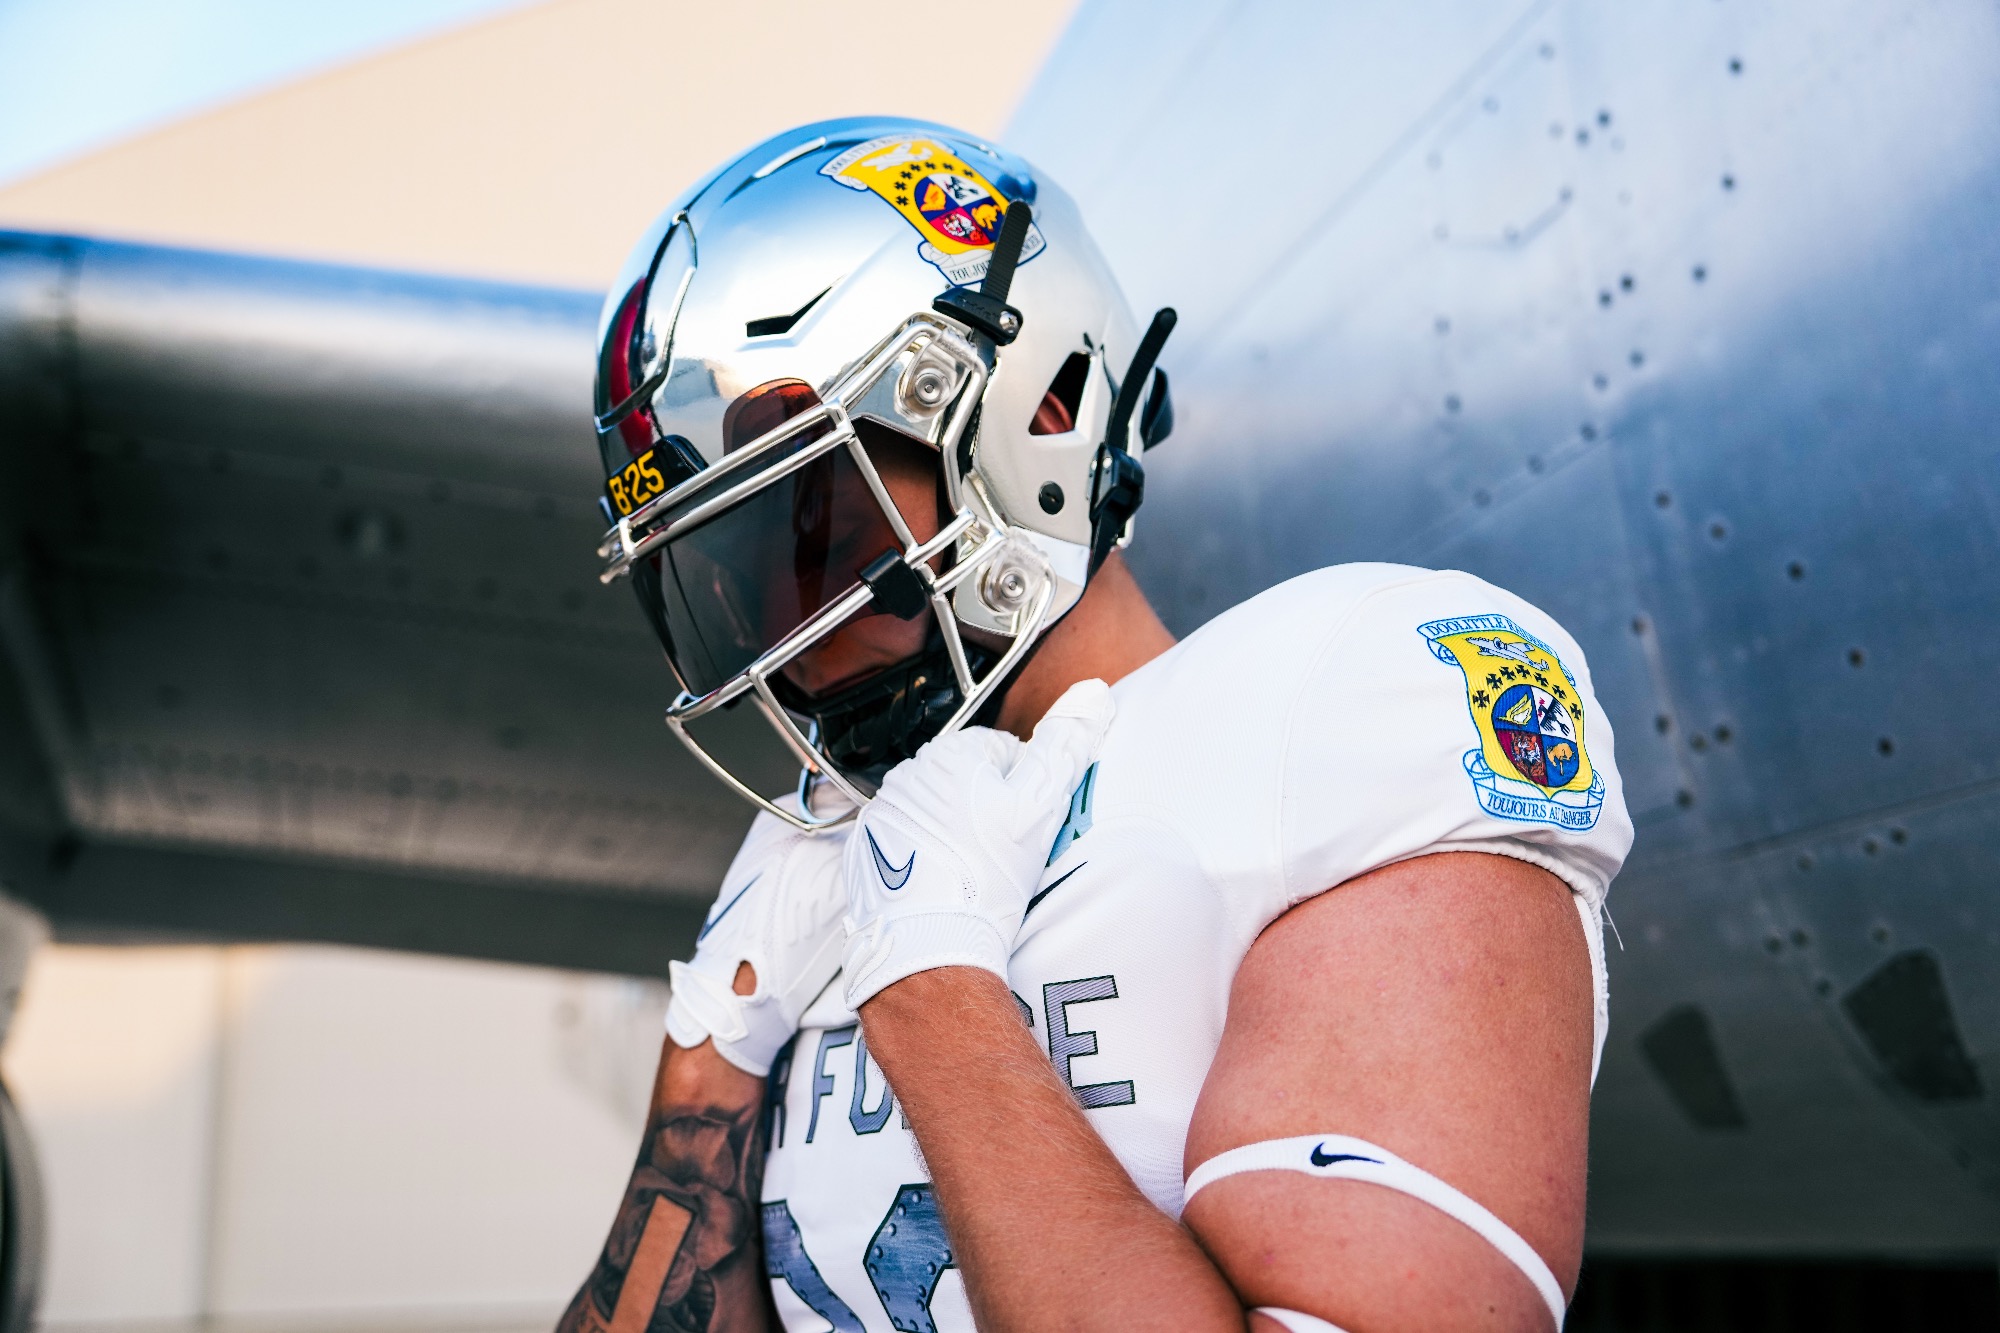 Photos: Air Force Will Take on Navy in Special Doolittle Raider Uniforms